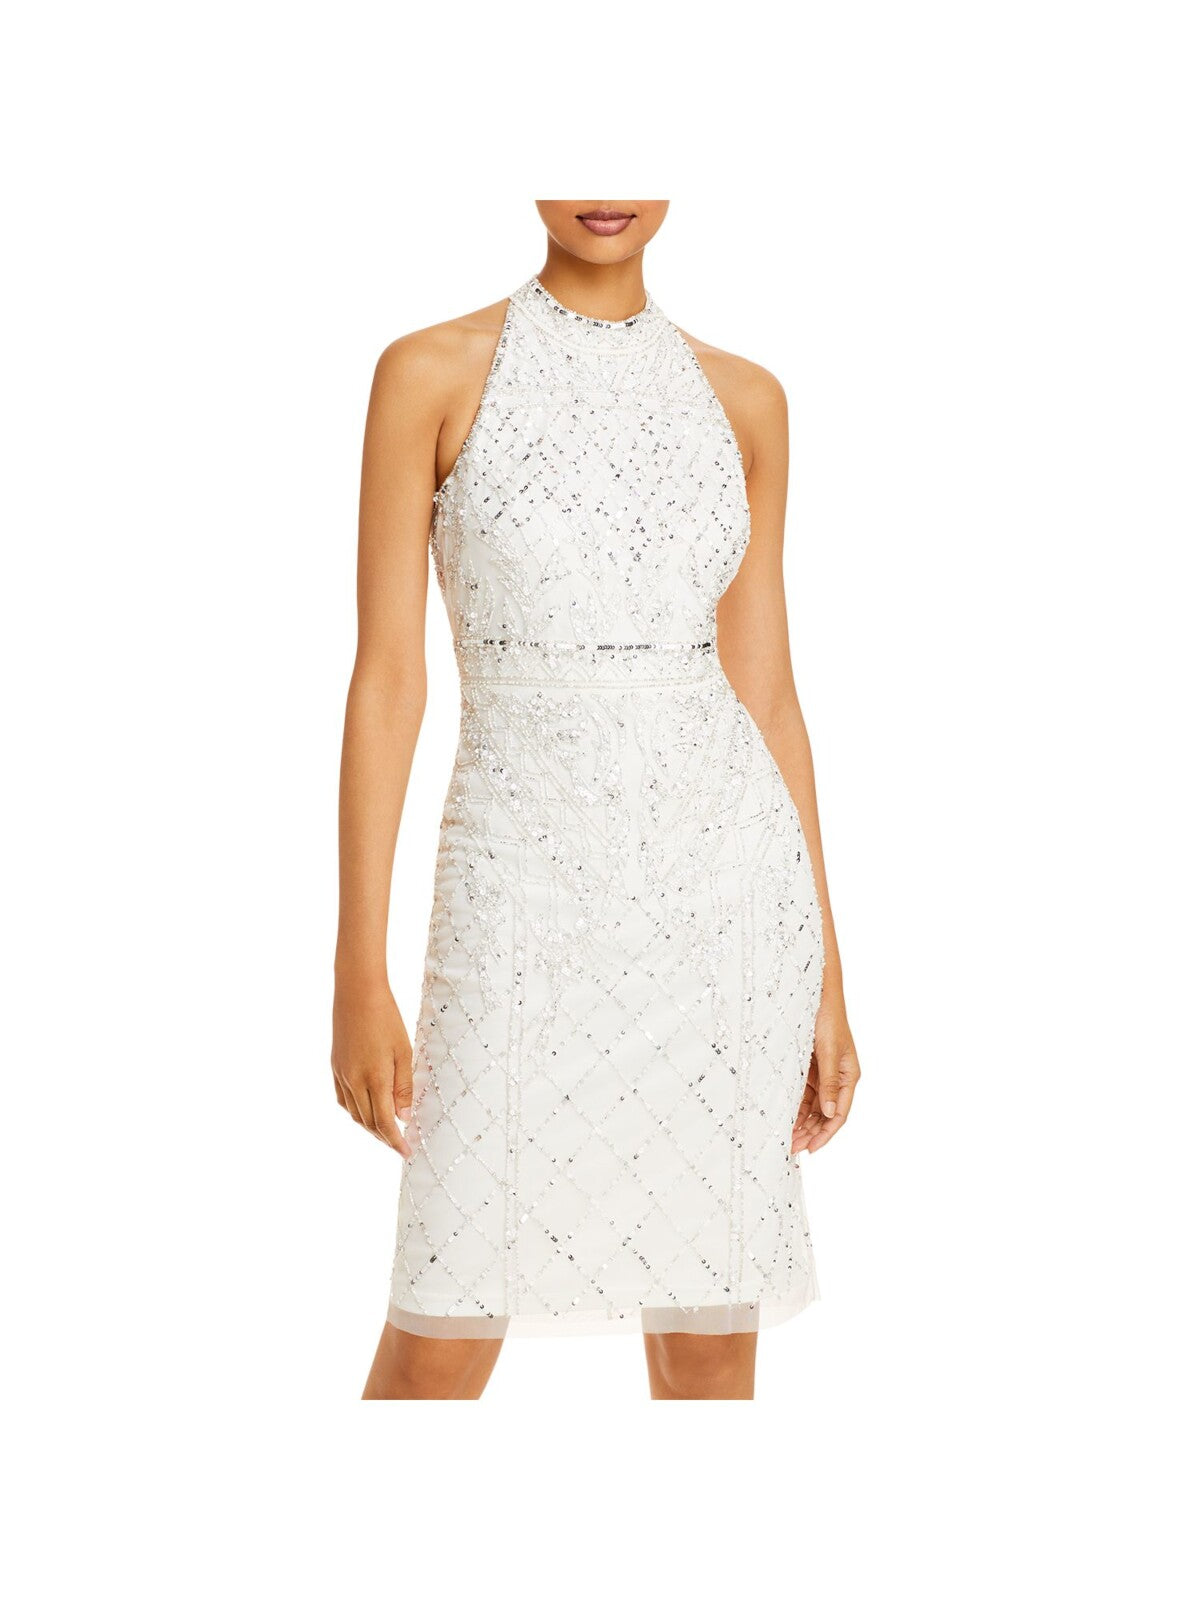 ADRIANNA PAPELL Womens White Beaded Sequined Zippered Lined Sleeveless Halter Above The Knee Formal Sheath Dress 10